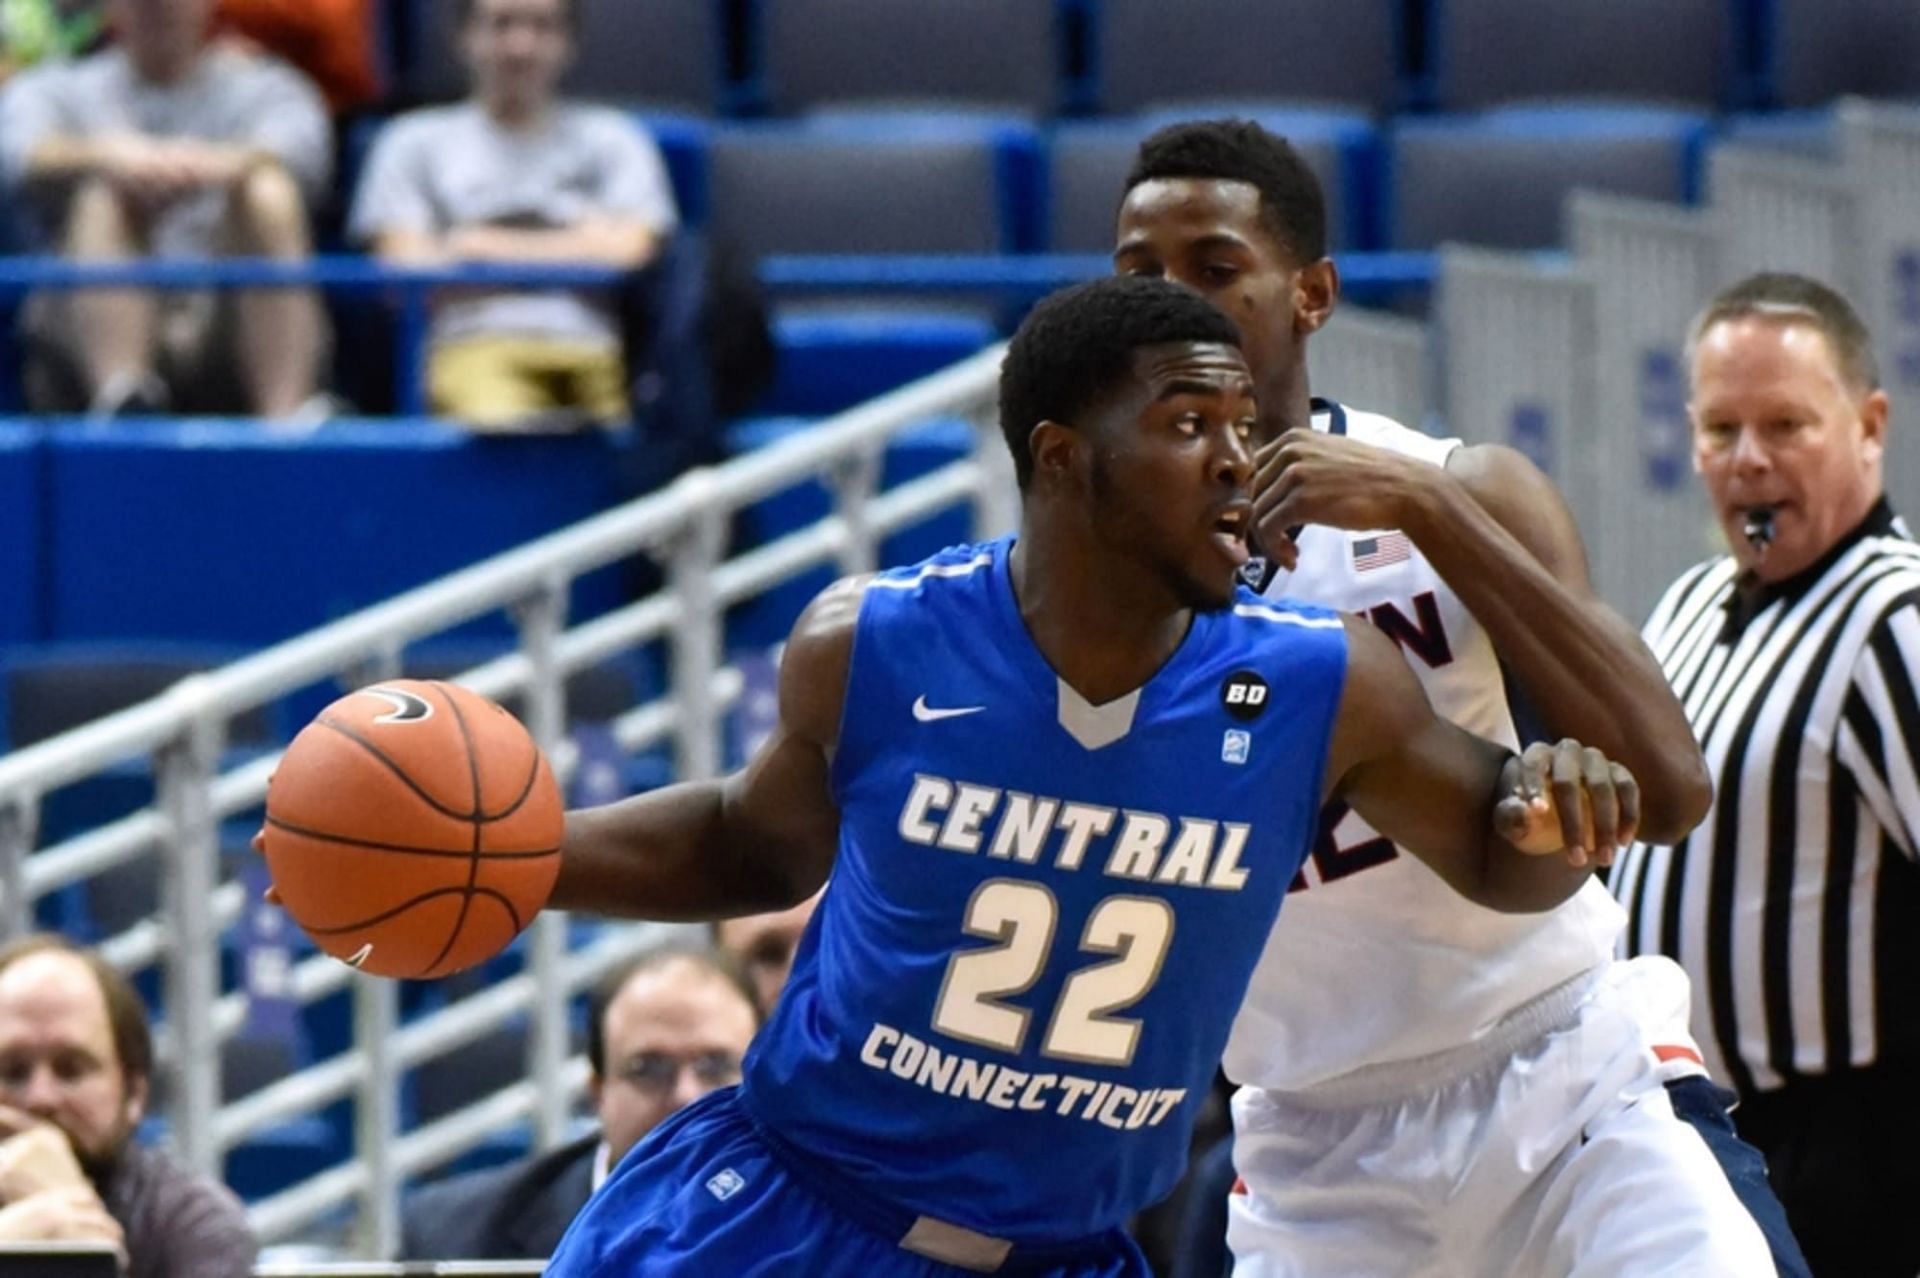 Central Connecticut State Blue Devils vs St. Francis Brooklyn Terriers